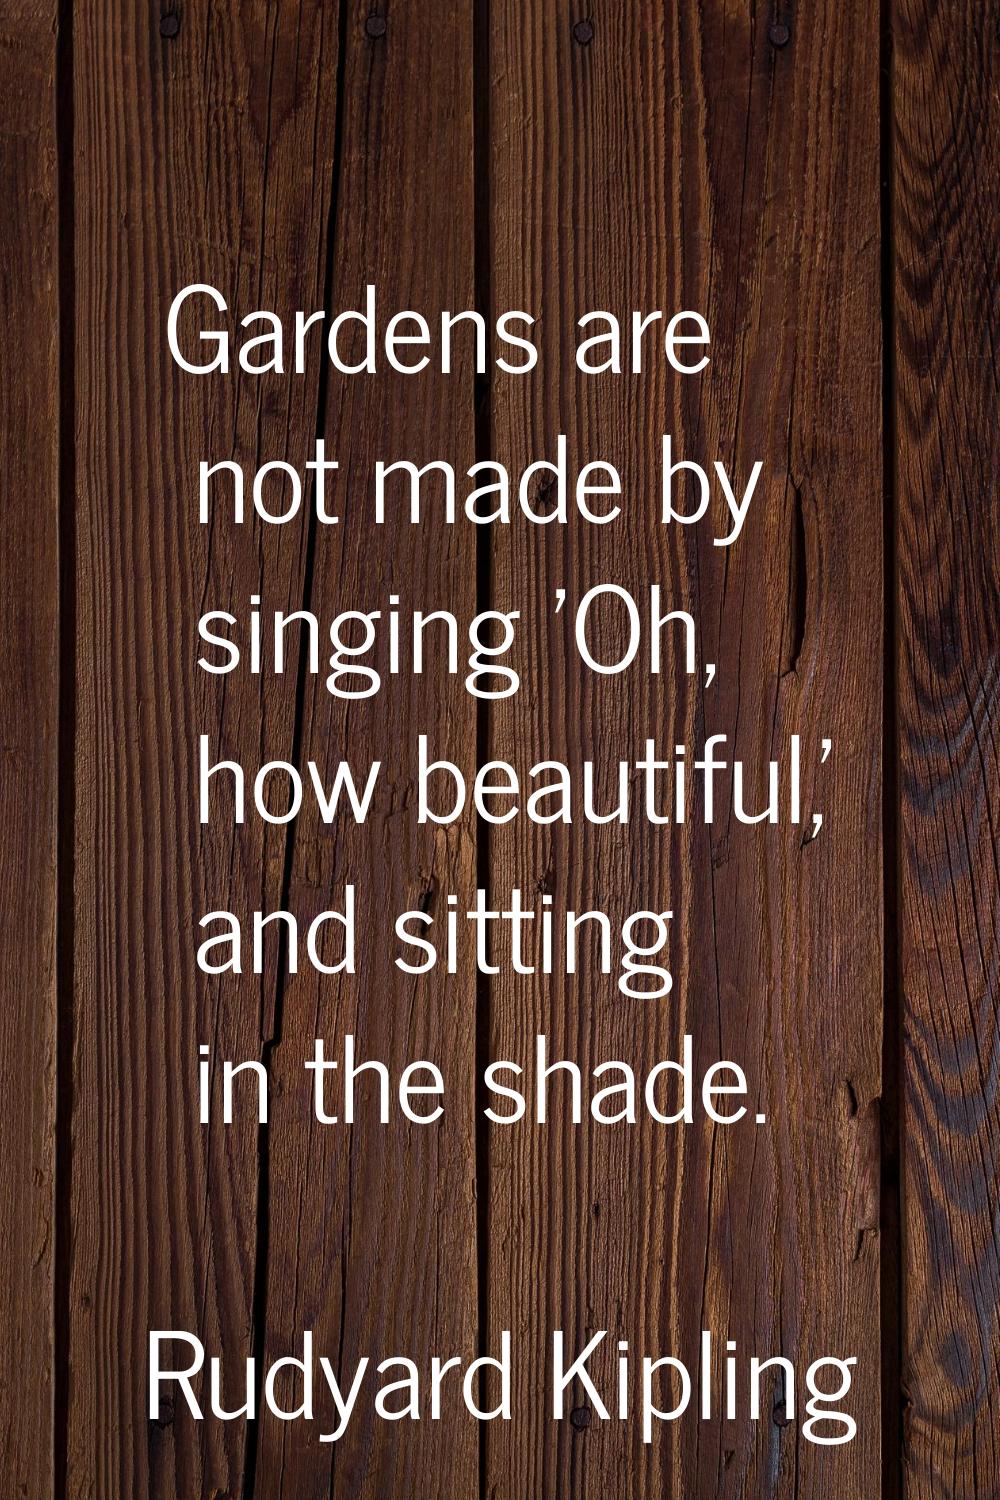 Gardens are not made by singing 'Oh, how beautiful,' and sitting in the shade.